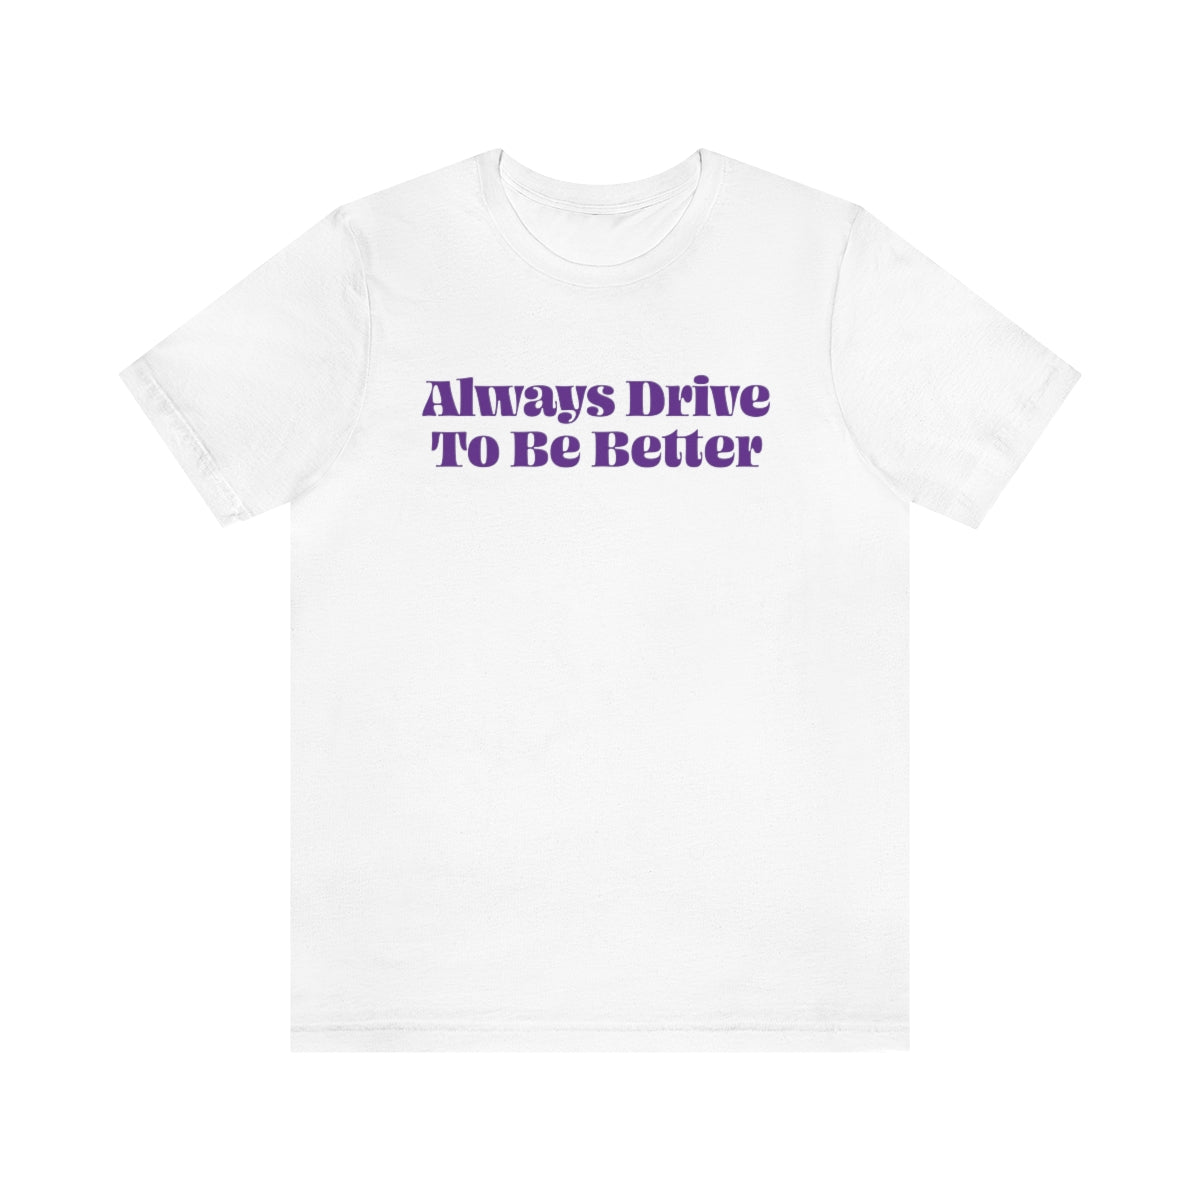 Emily Innes: Always Drive to Be Better Tee